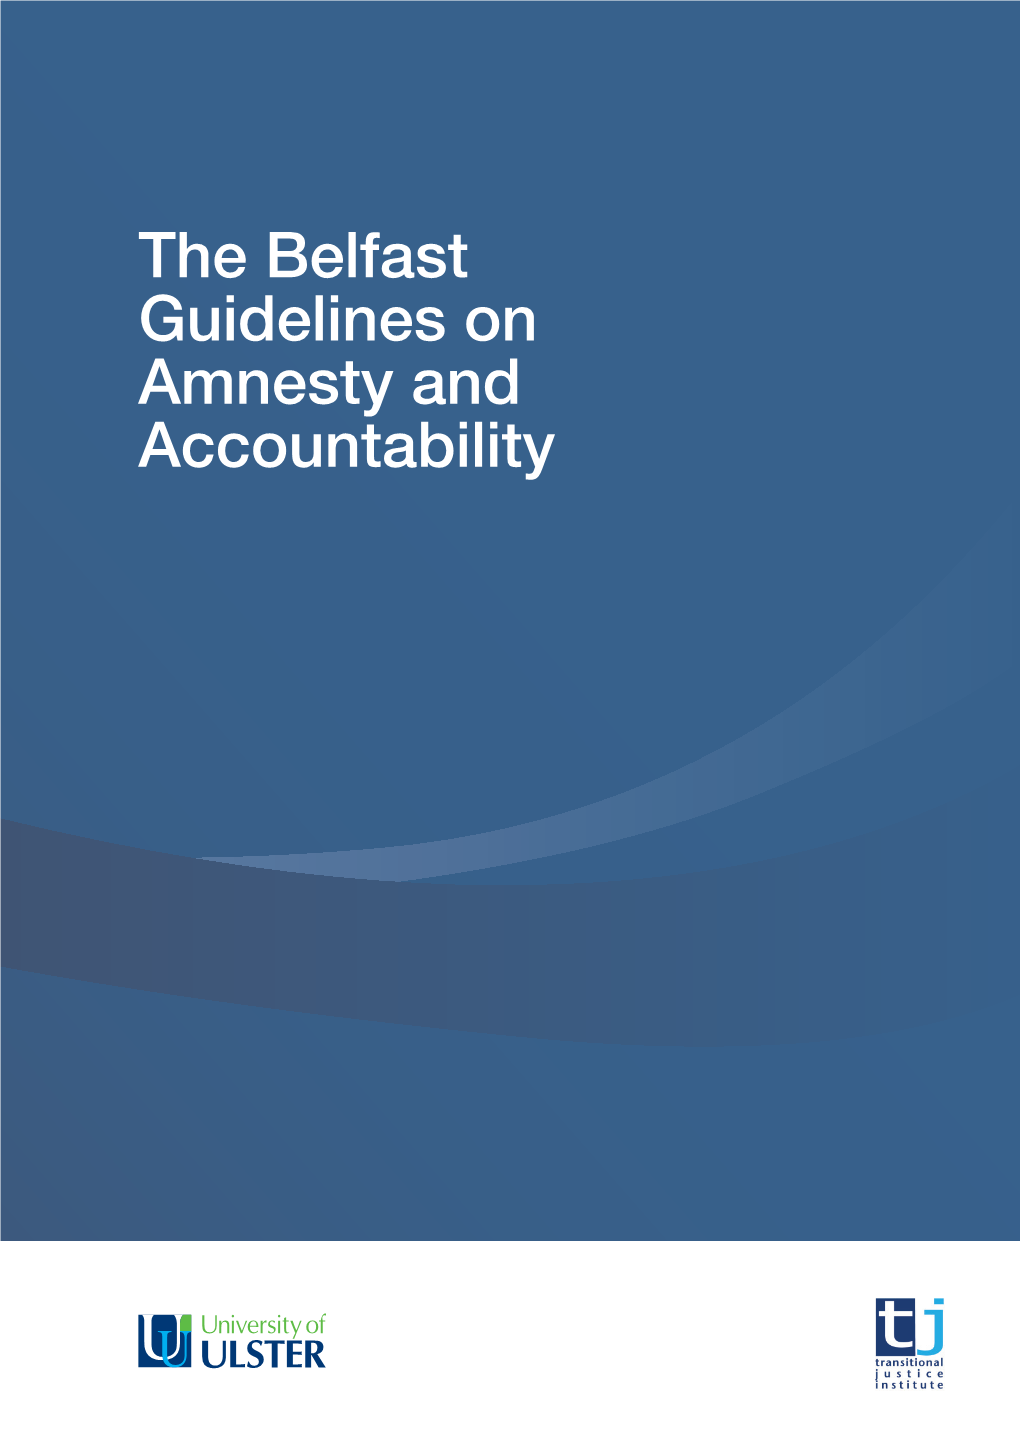 The Belfast Guidelines on Amnesty and Accountability